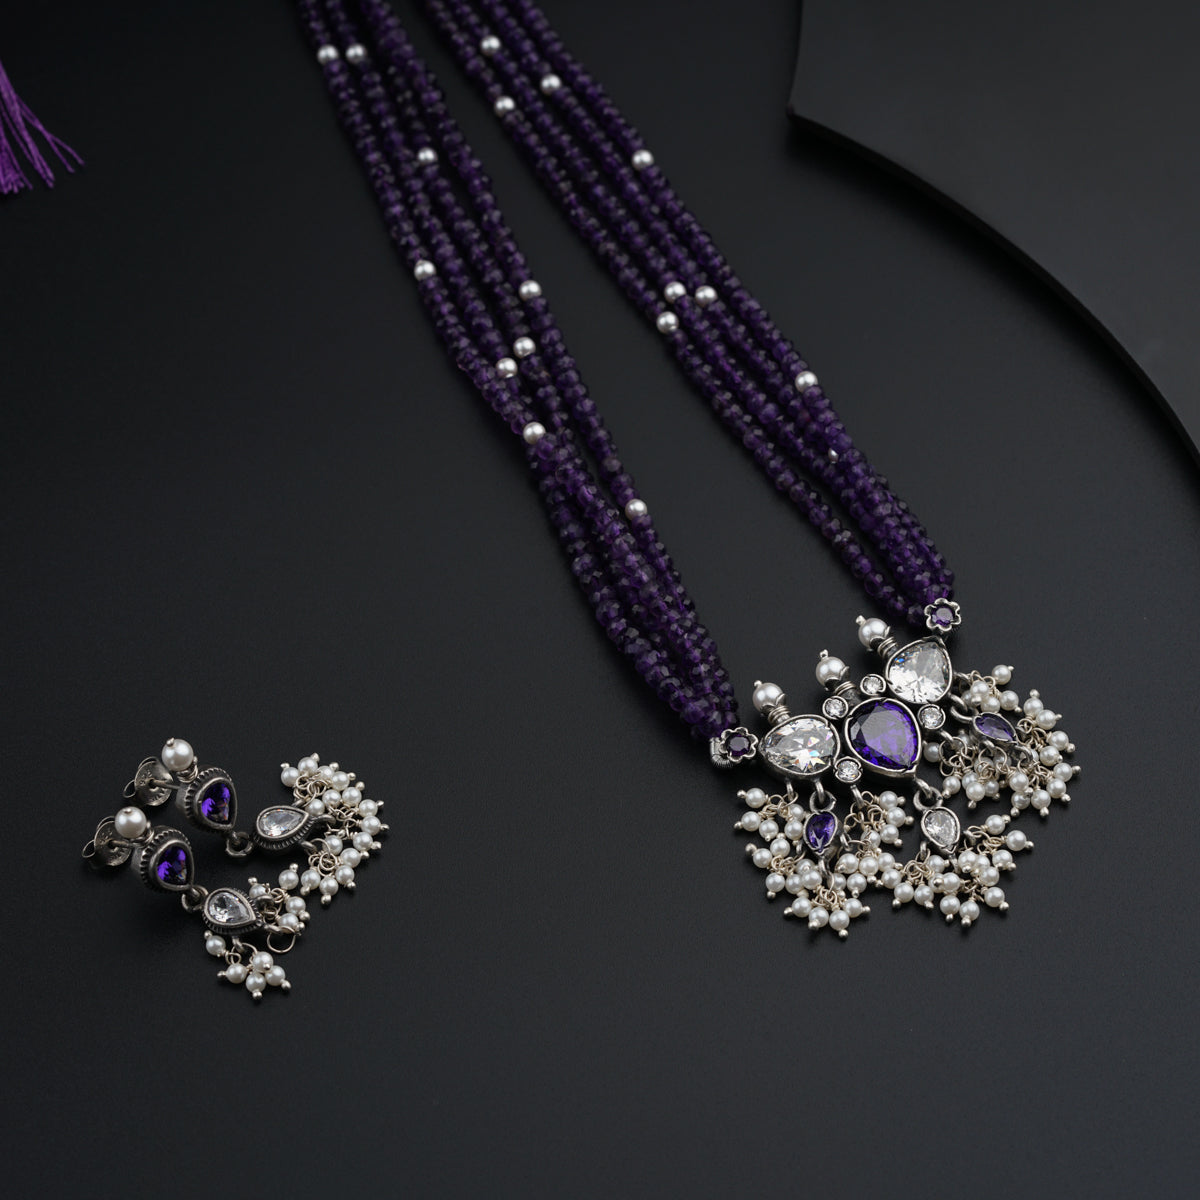 a purple necklace and earring with pearls